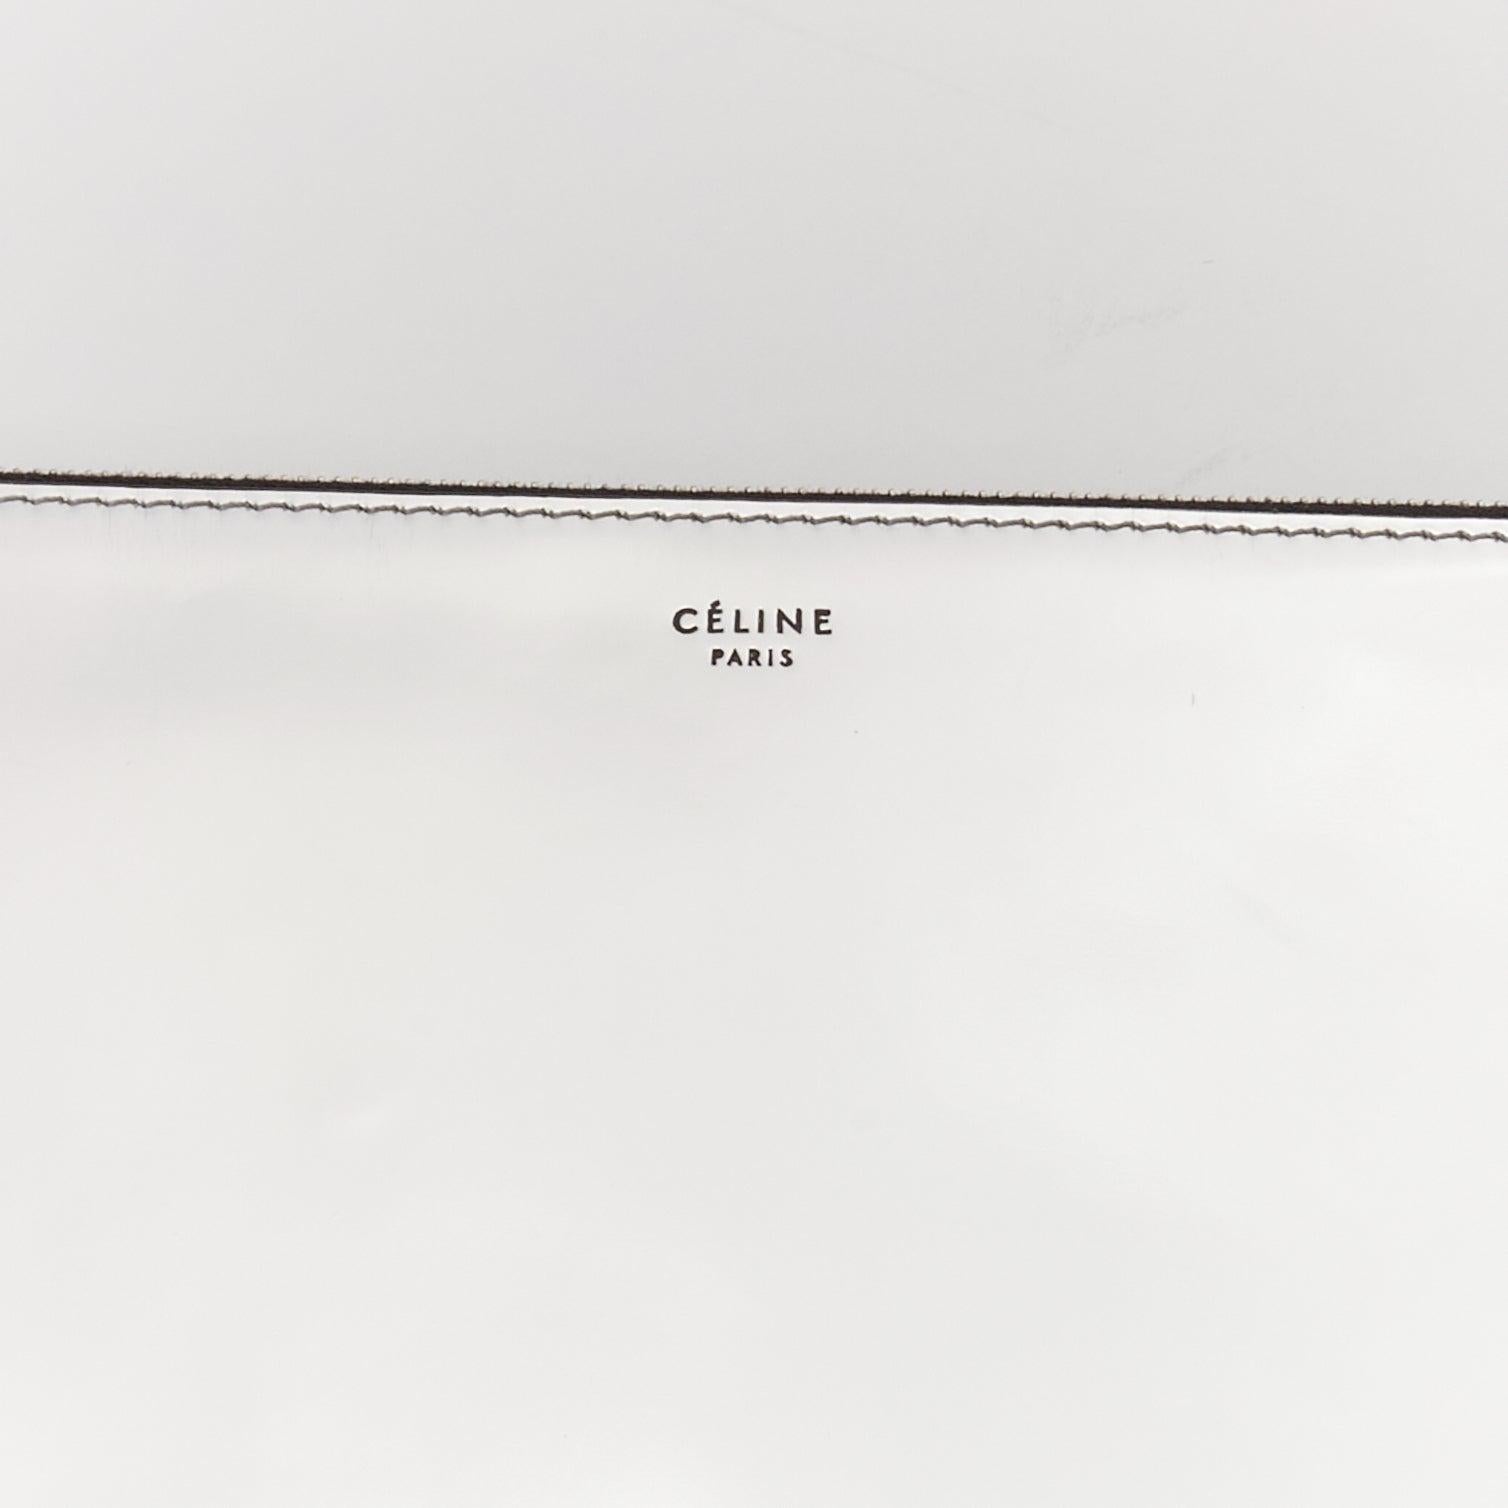 CELINE silver mirrored leather flat O ring zip pouch clutch bag
Reference: BSHW/A00184
Brand: Celine
Designer: Phoebe Philo
Material: Leather
Color: Silver
Pattern: Solid
Closure: Zip
Lining: Black Leather
Extra Details: O ring zip. silver mirror